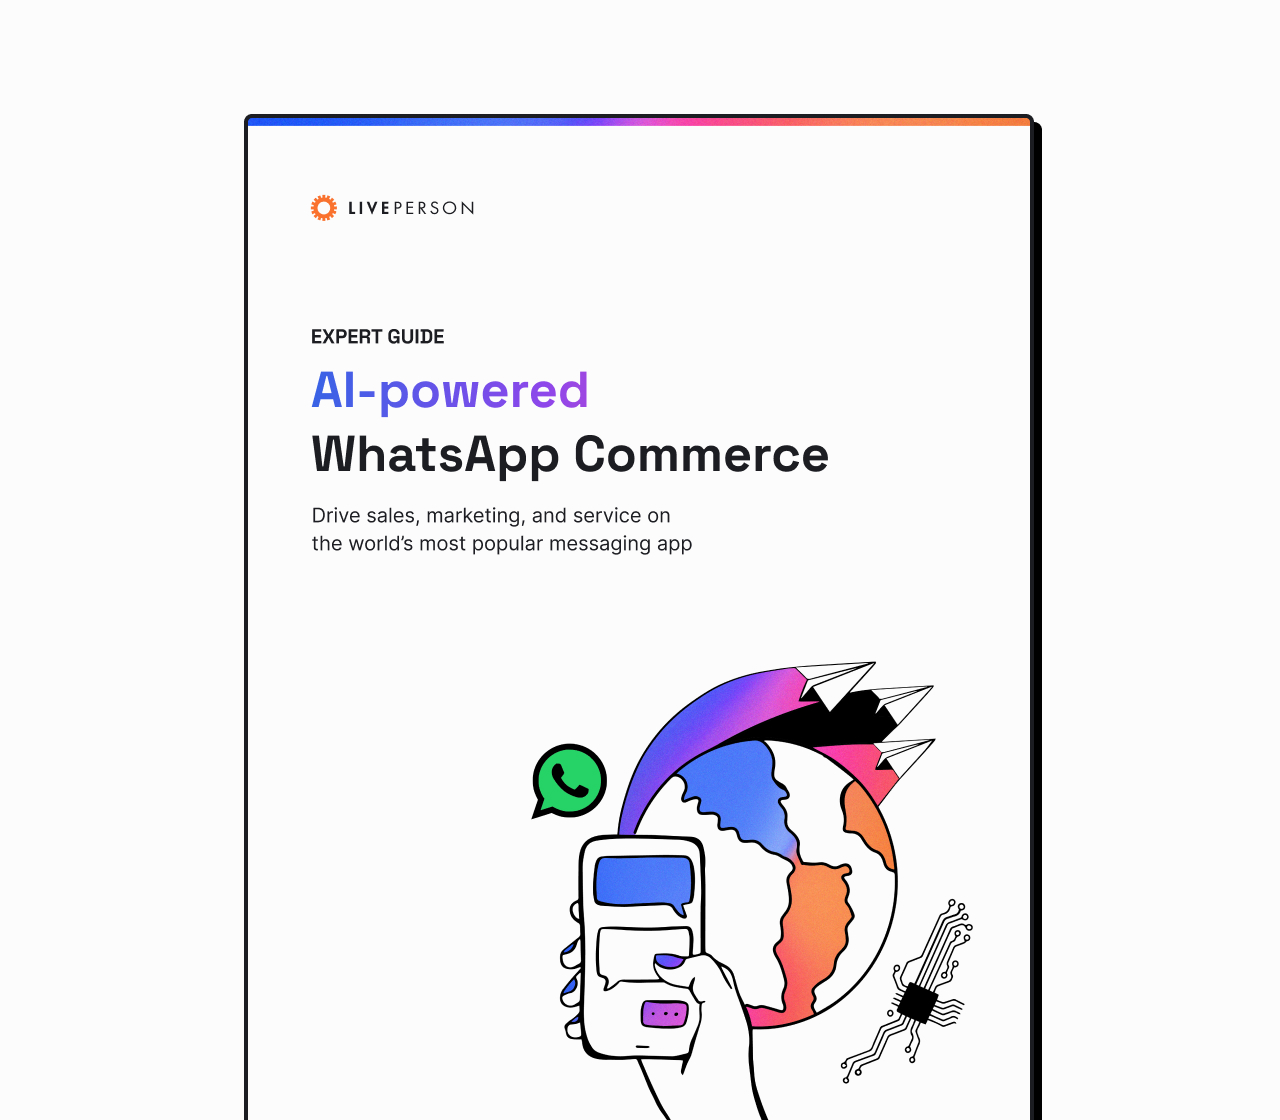 Cover of expert guide to WhatsApp Business app + LivePerson messaging strategies